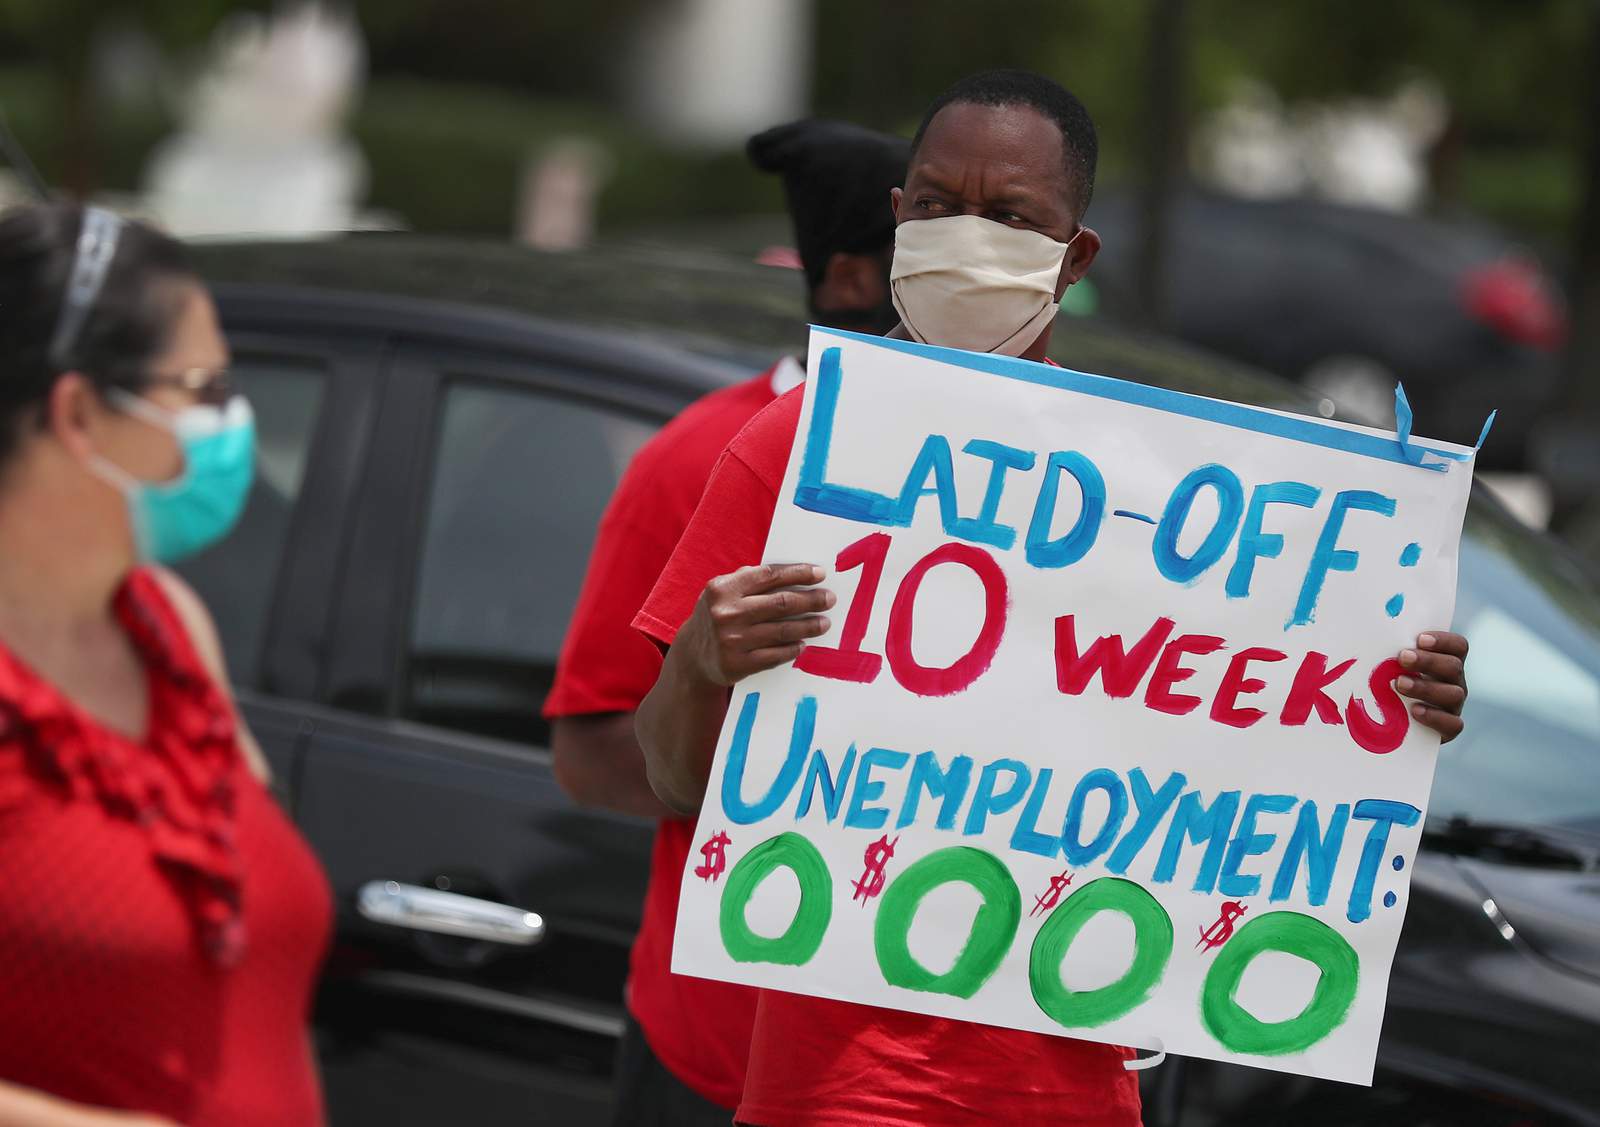 Florida seeks to boost unemployment benefits by $300 per week